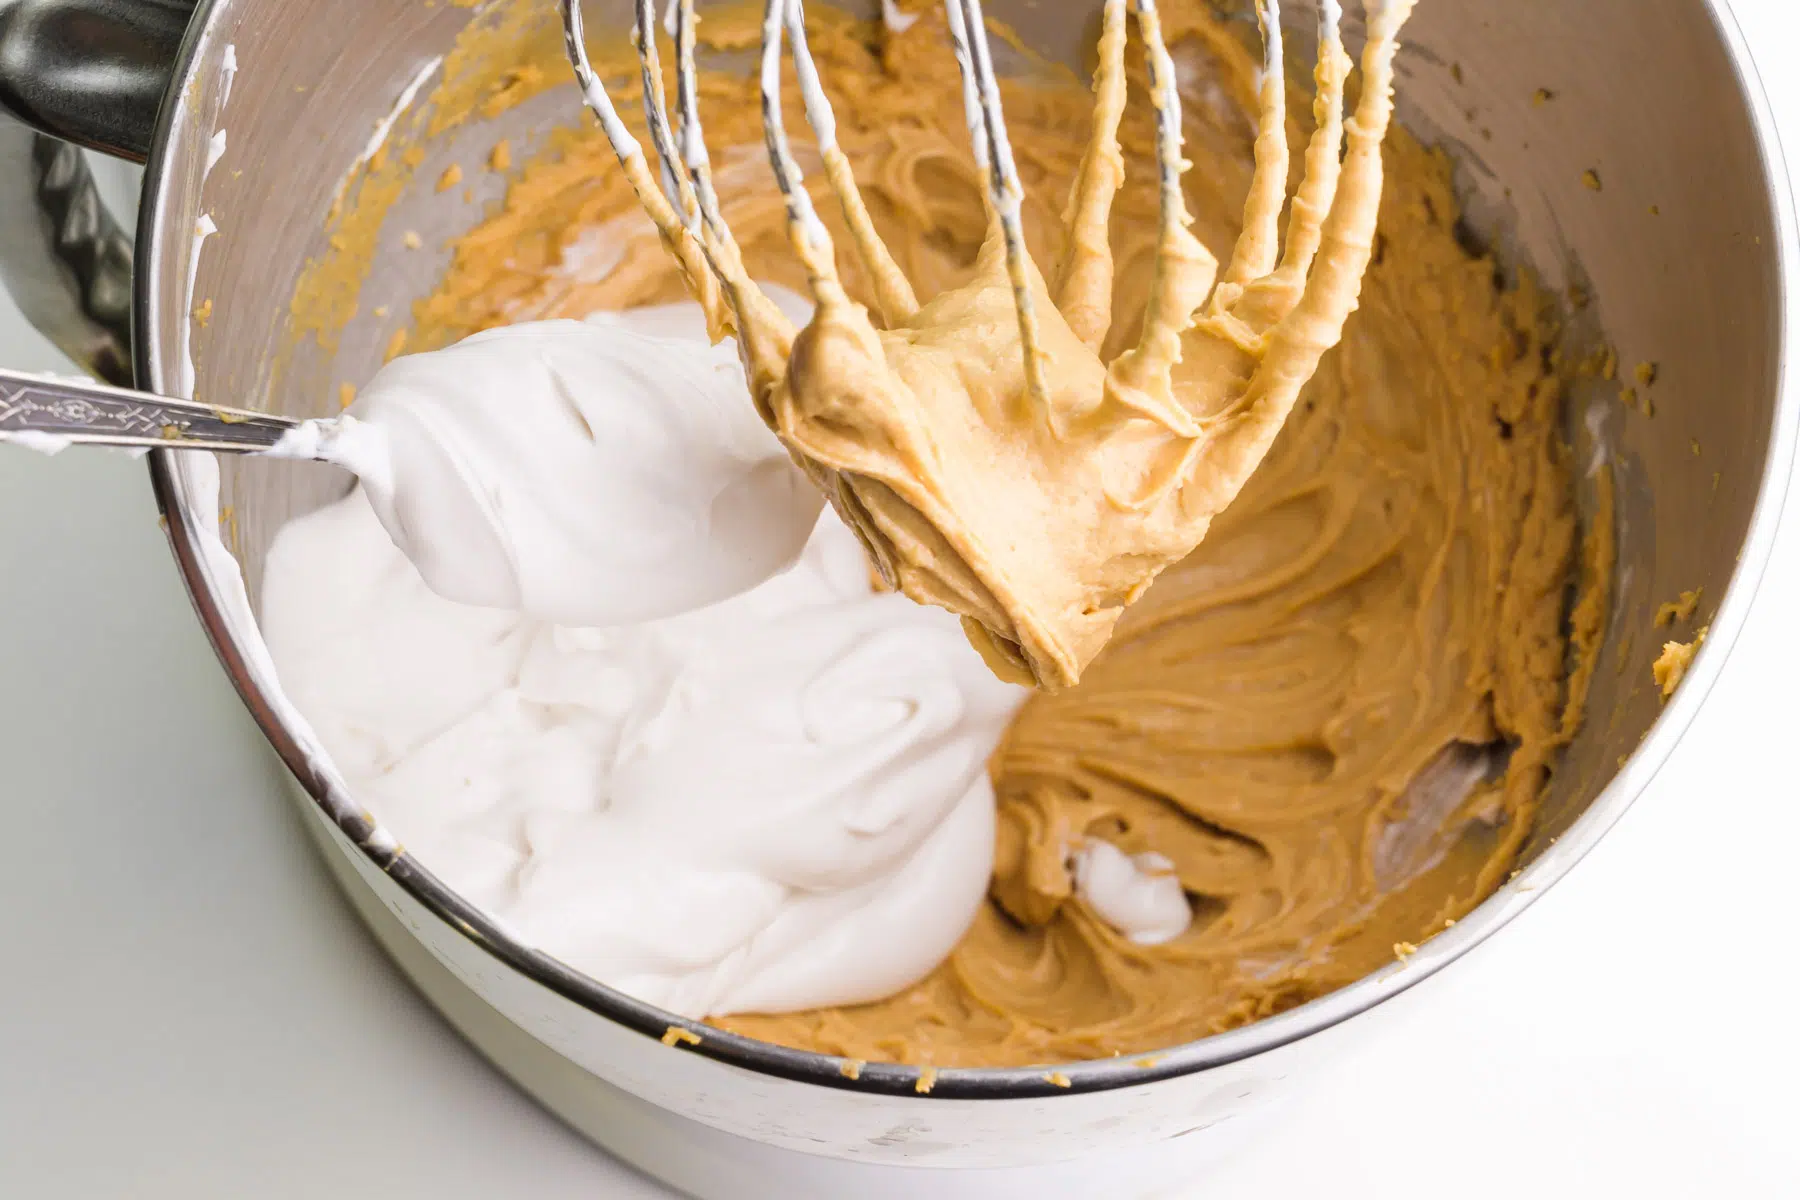 Whipped coconut milk is addied to a stand mixer bowl with a peanut butter mixture.